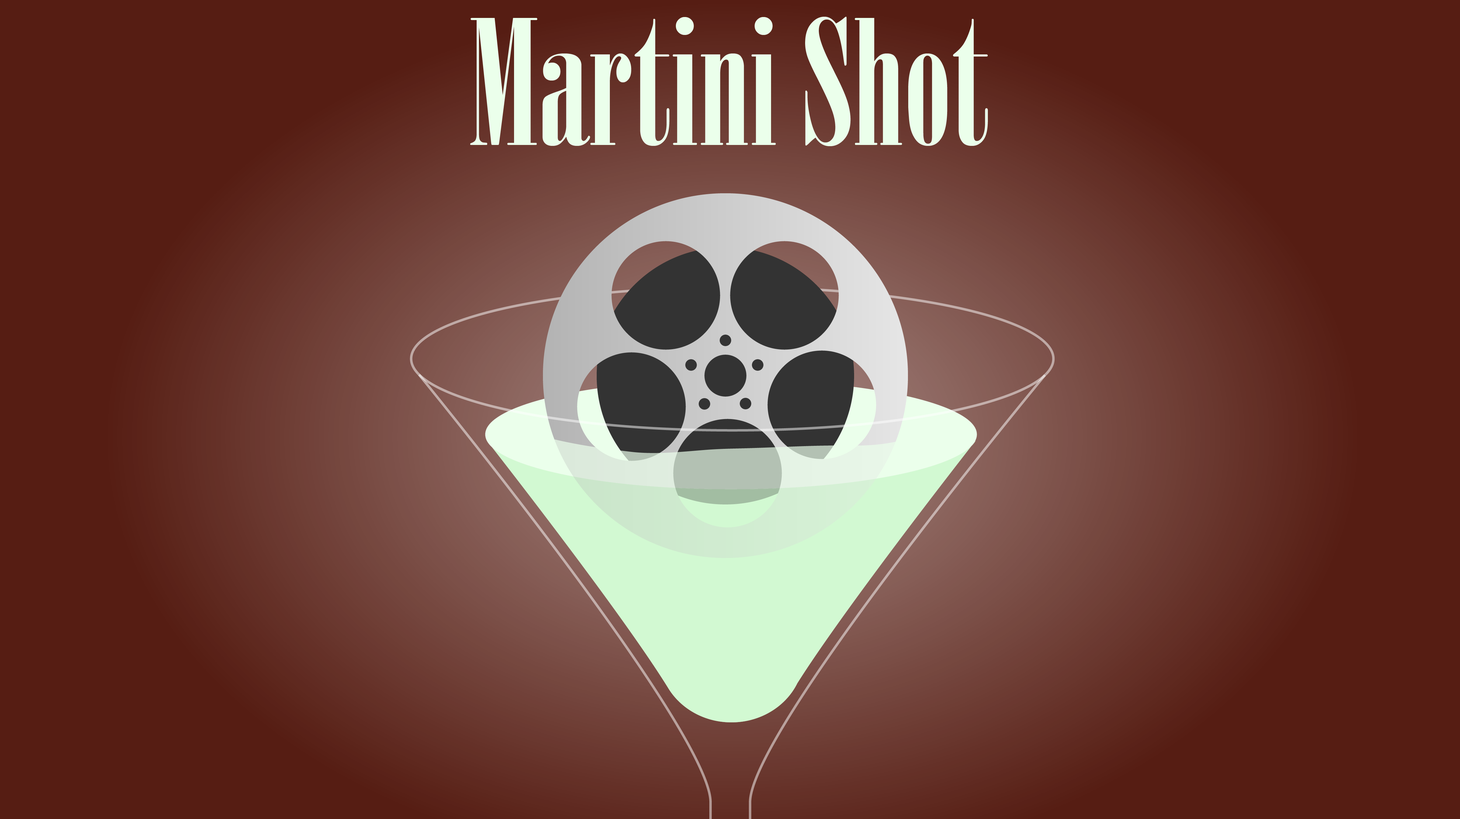 On this week's Martini Shot, Rob is not hired to play himself. He don’t have the chops, apparently.